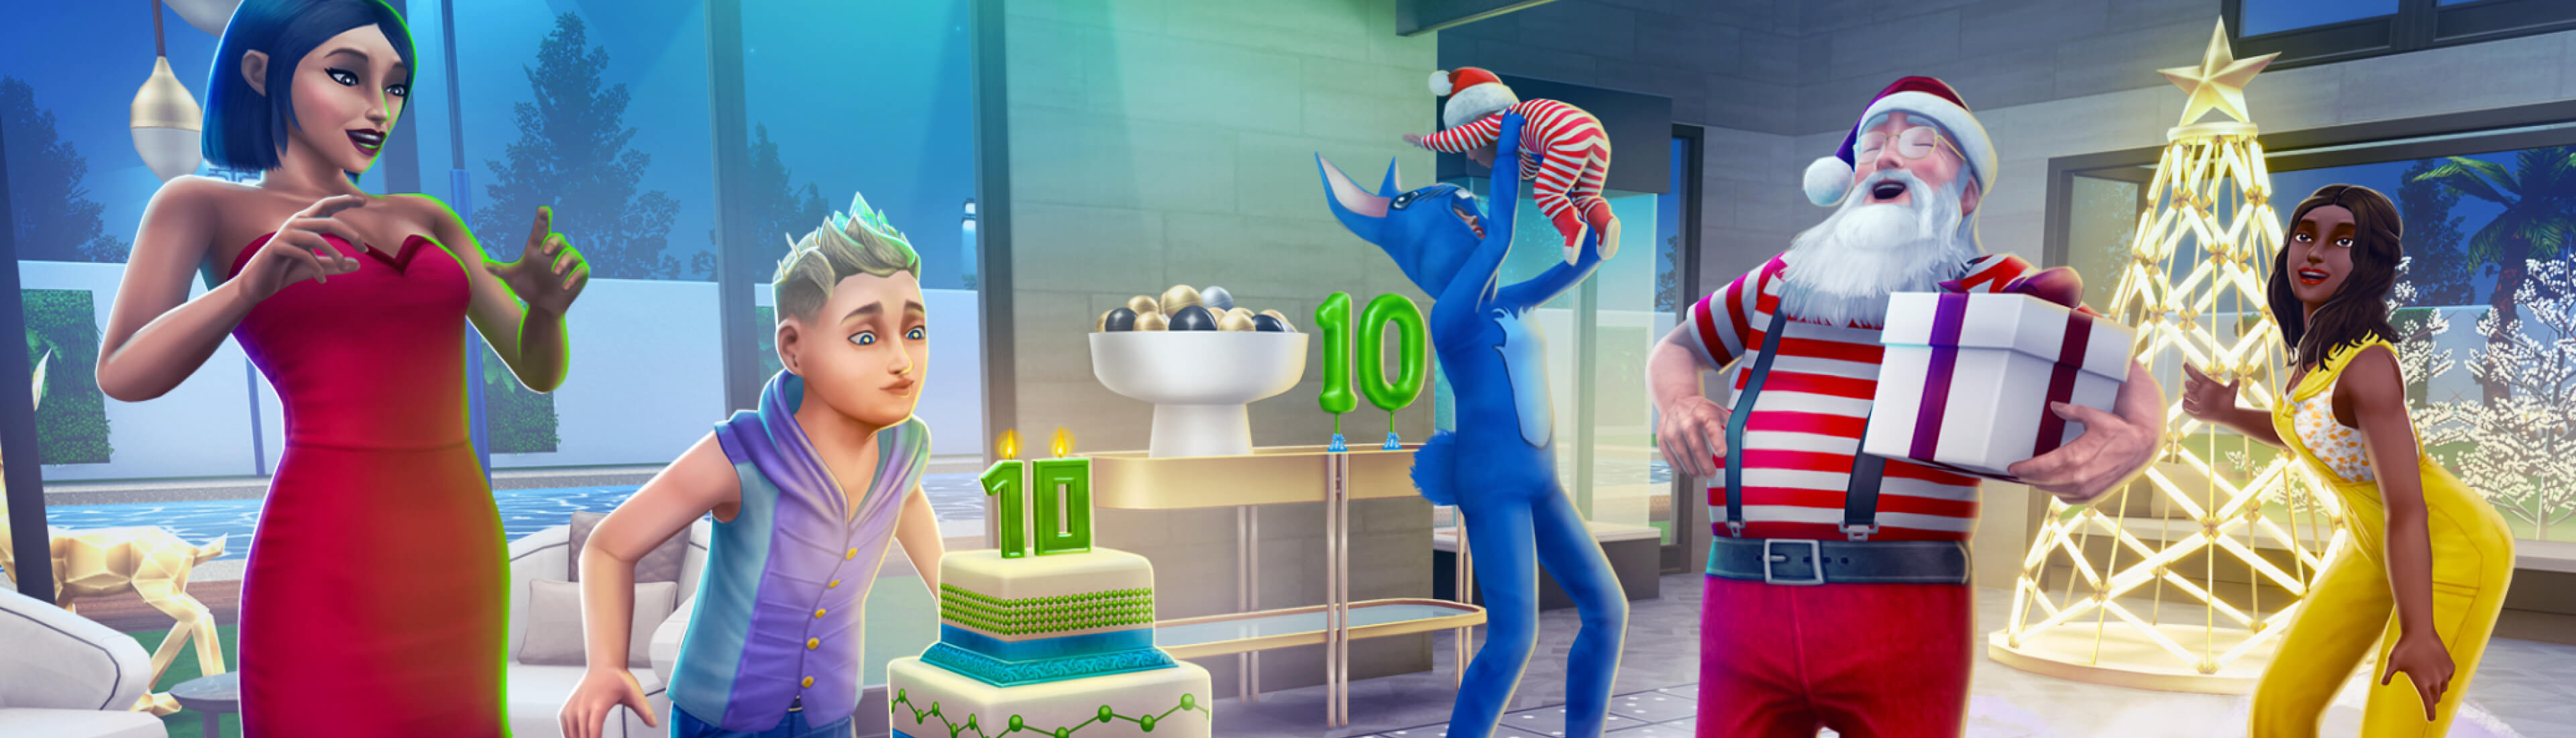 sims 4 latest version number